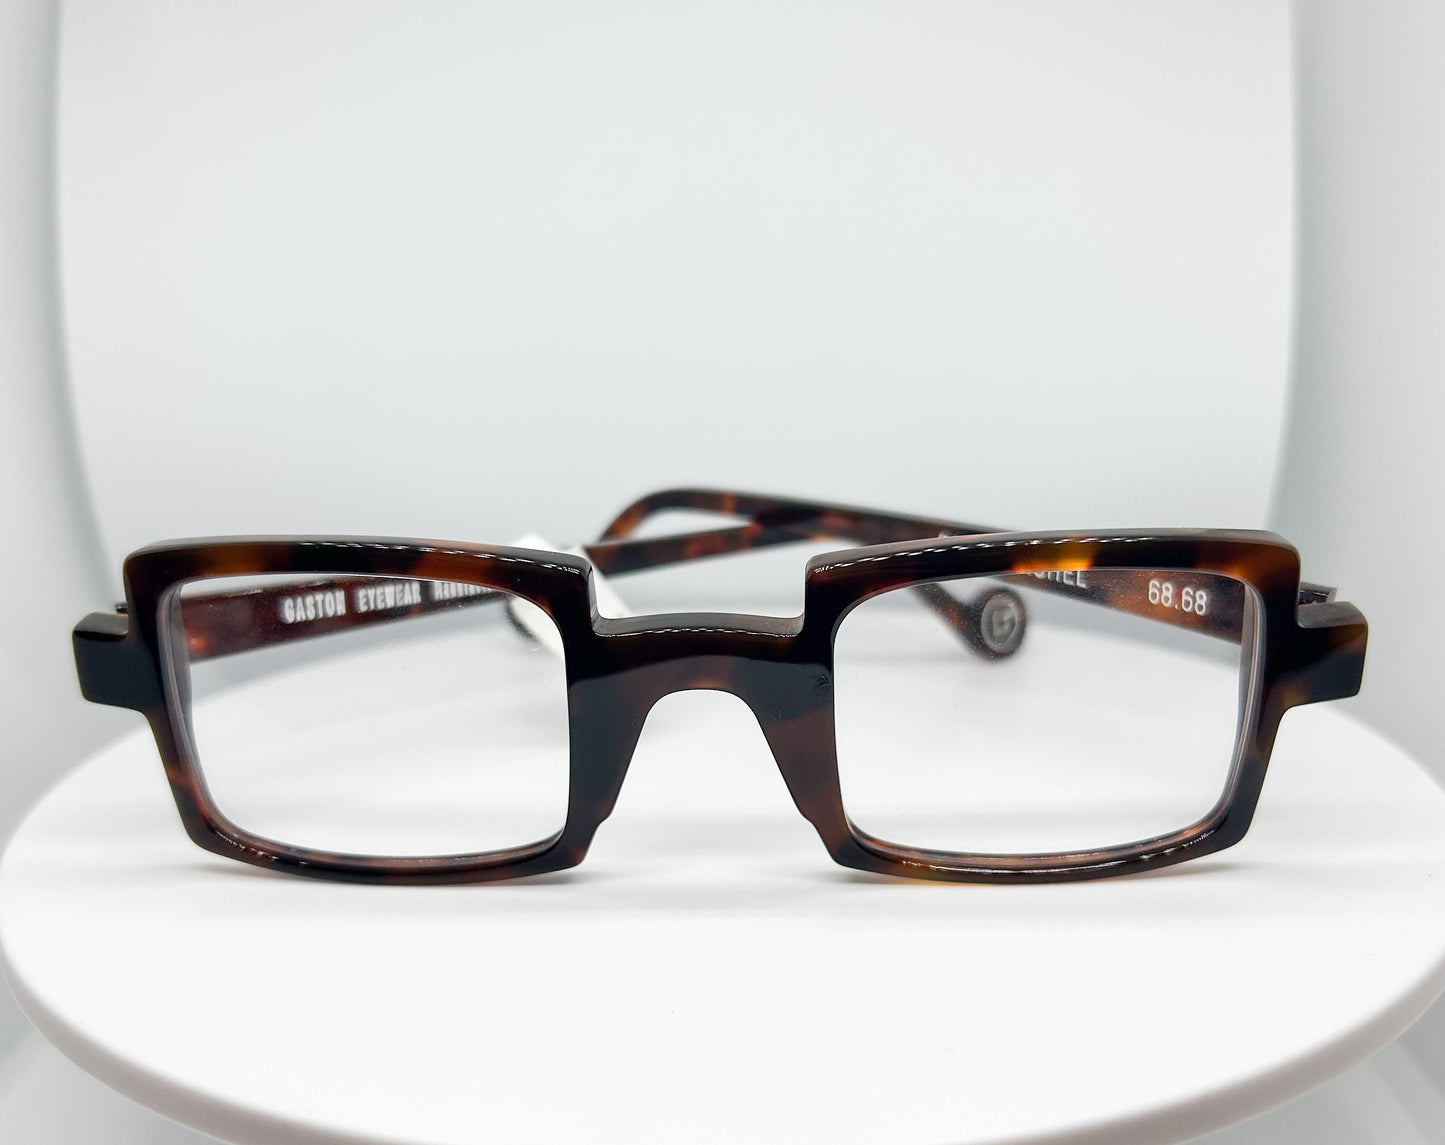 Buy Gaston Eyewear - Saint Michel, a  Dark Tortoise; Acetate Optical Frame with a Square shape. An Authorized Dealer, Adair Eyewear has a 40+ Years History of Customer Service Excellence